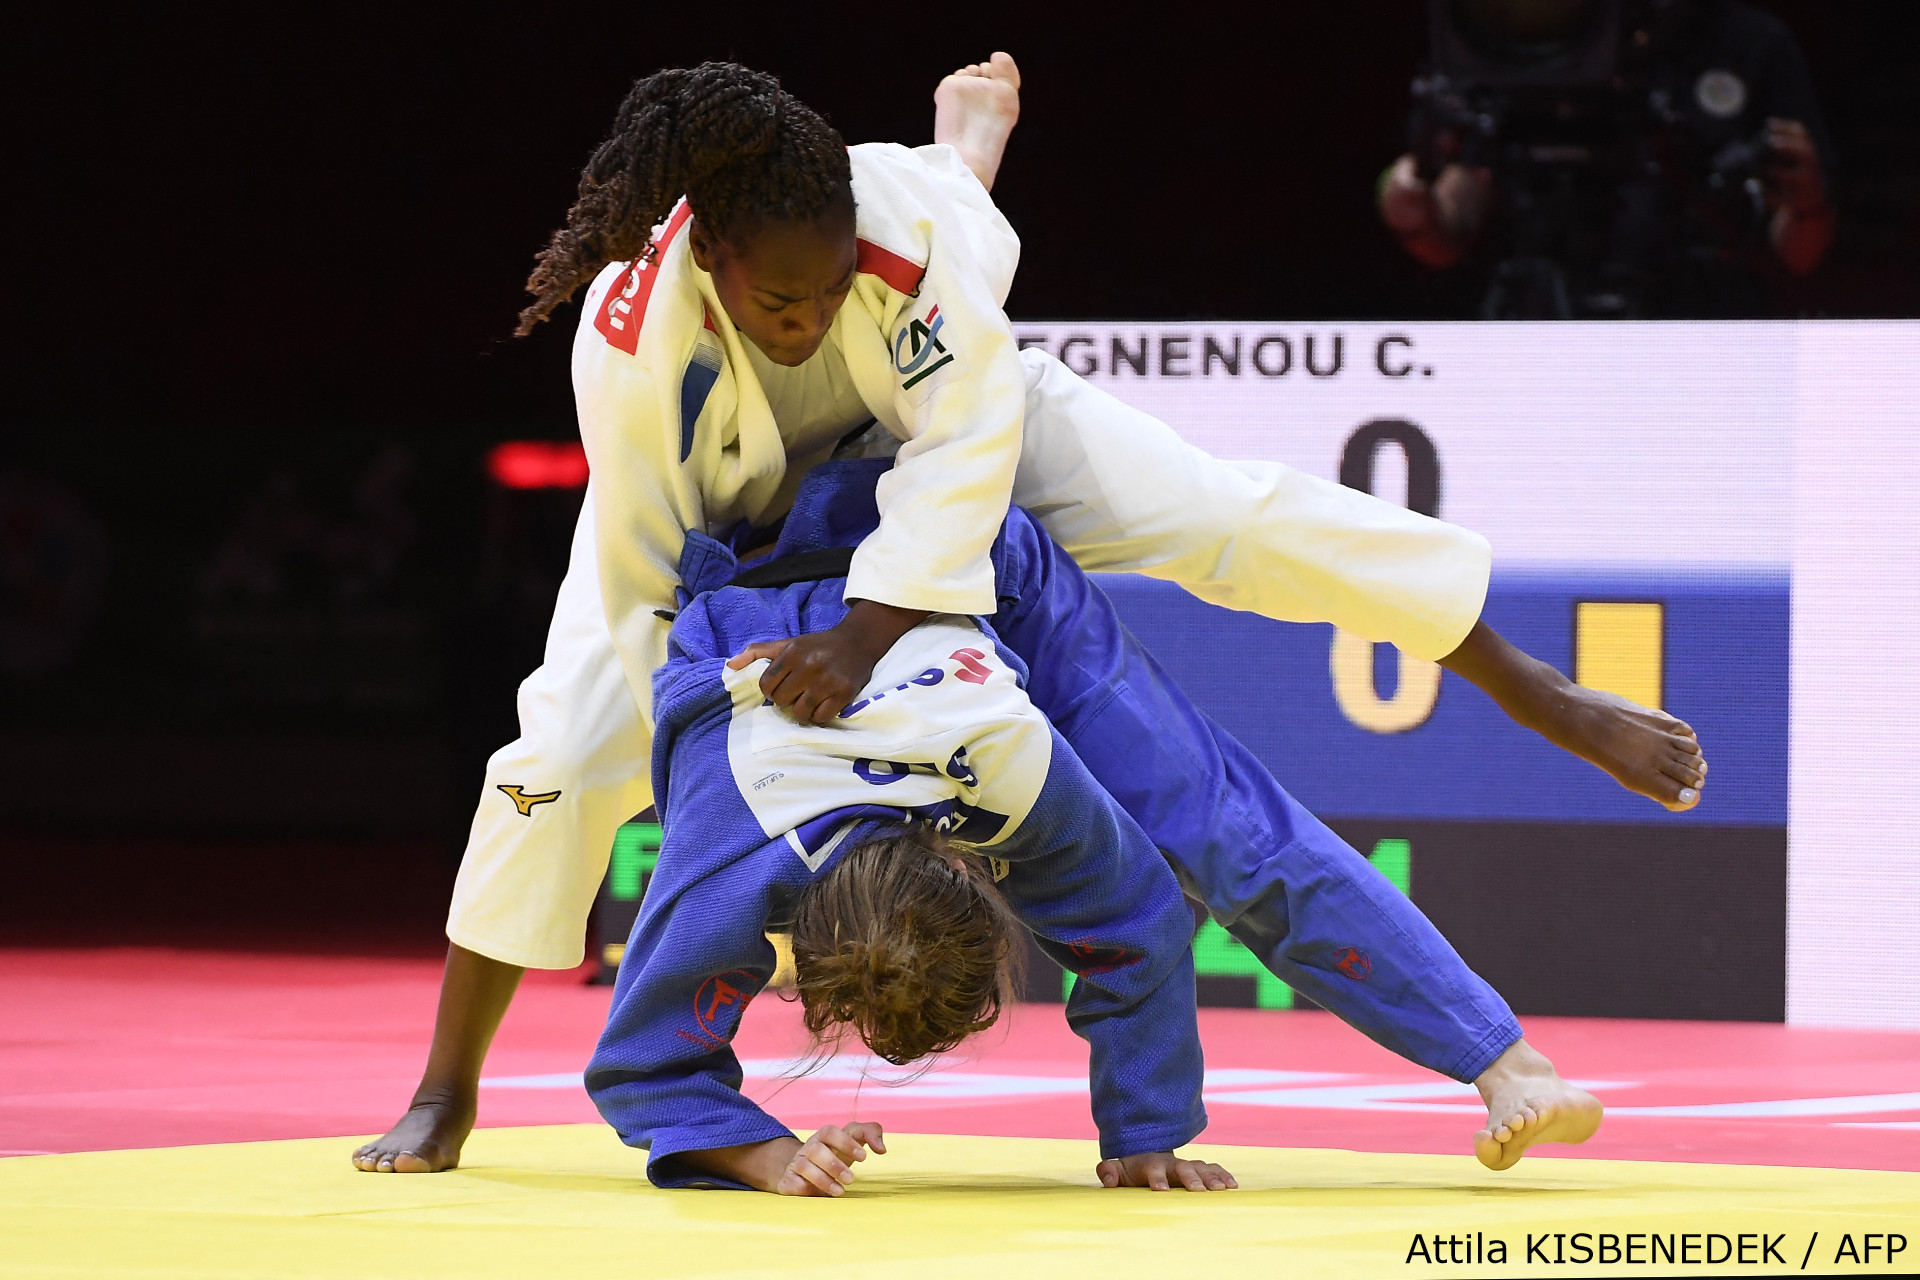 France Diplomacy On Twitter Congratulations To Clarisse Agbegnenou 5 Times Judo World Champion Good Luck In Tokyo We Ll Be Behind You All The Way Roadtotokyo Https T Co 5fsgobukoz Twitter